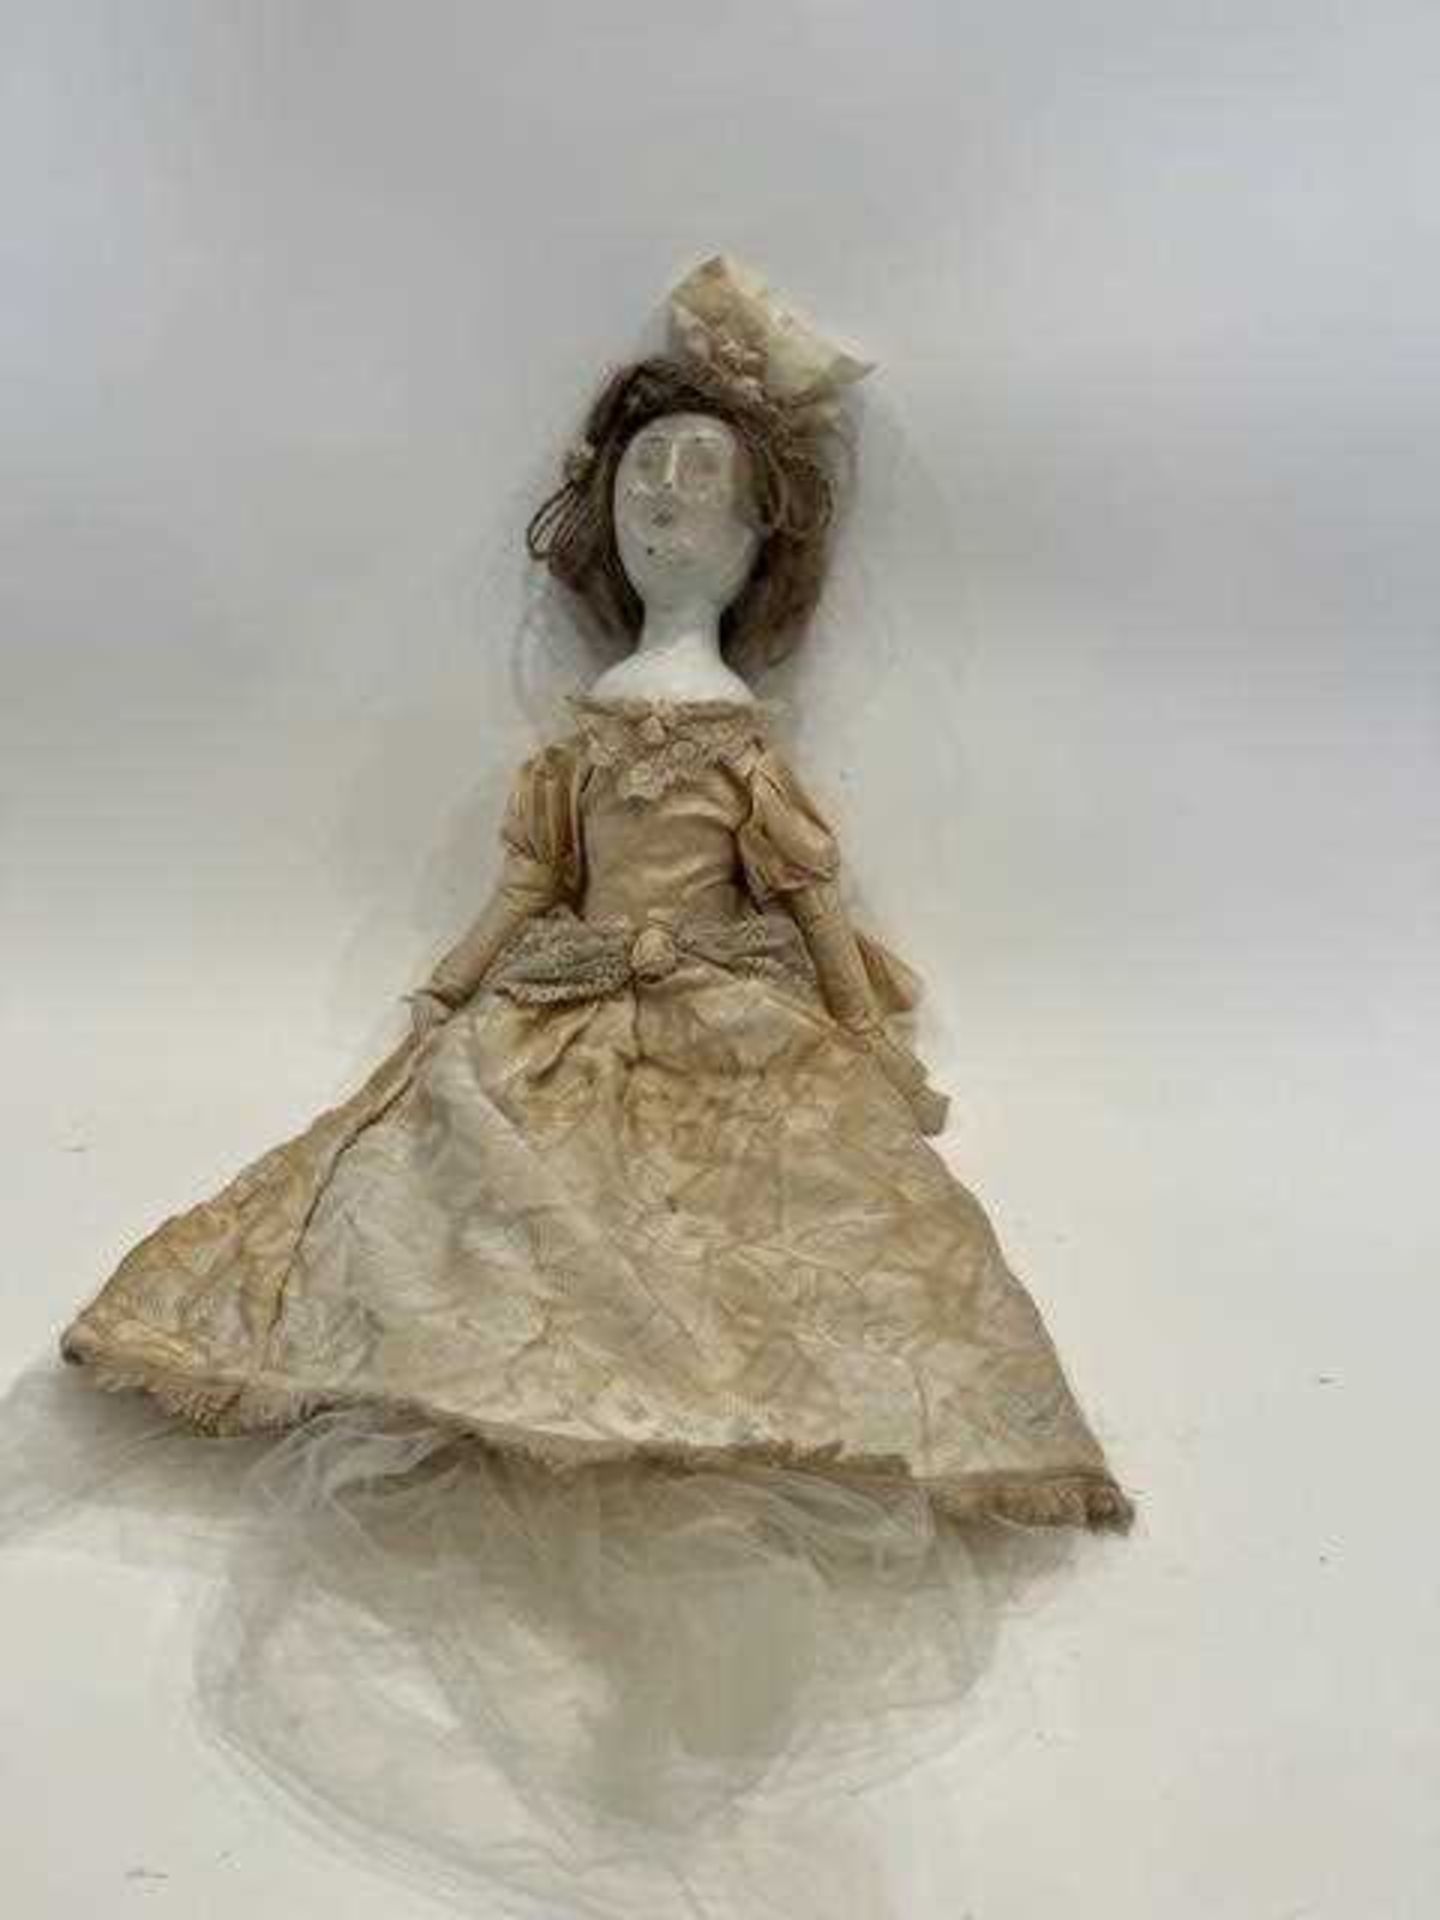 AN 18TH CENTURY STYLE WOODEN DOLL - Image 6 of 13